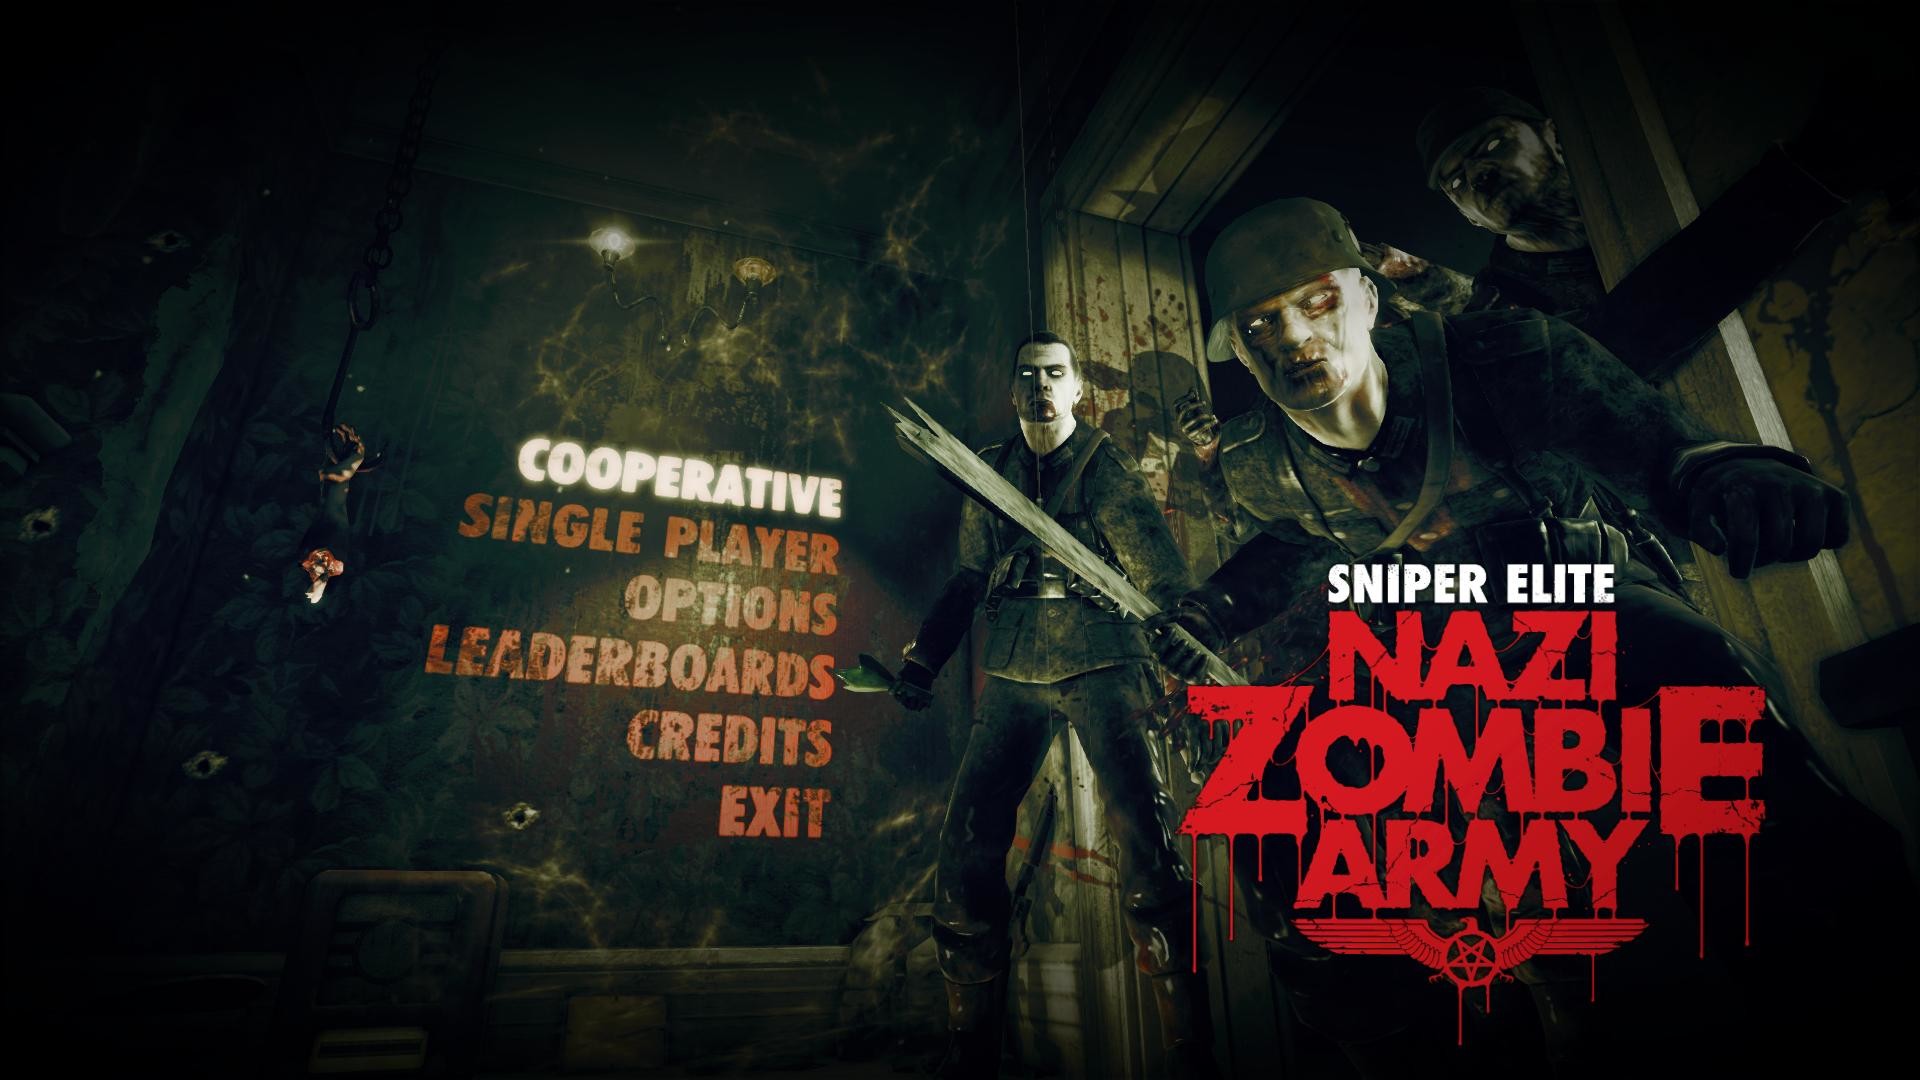 1920x1080 Images of Sniper Elite: Nazi Zombie Army | 